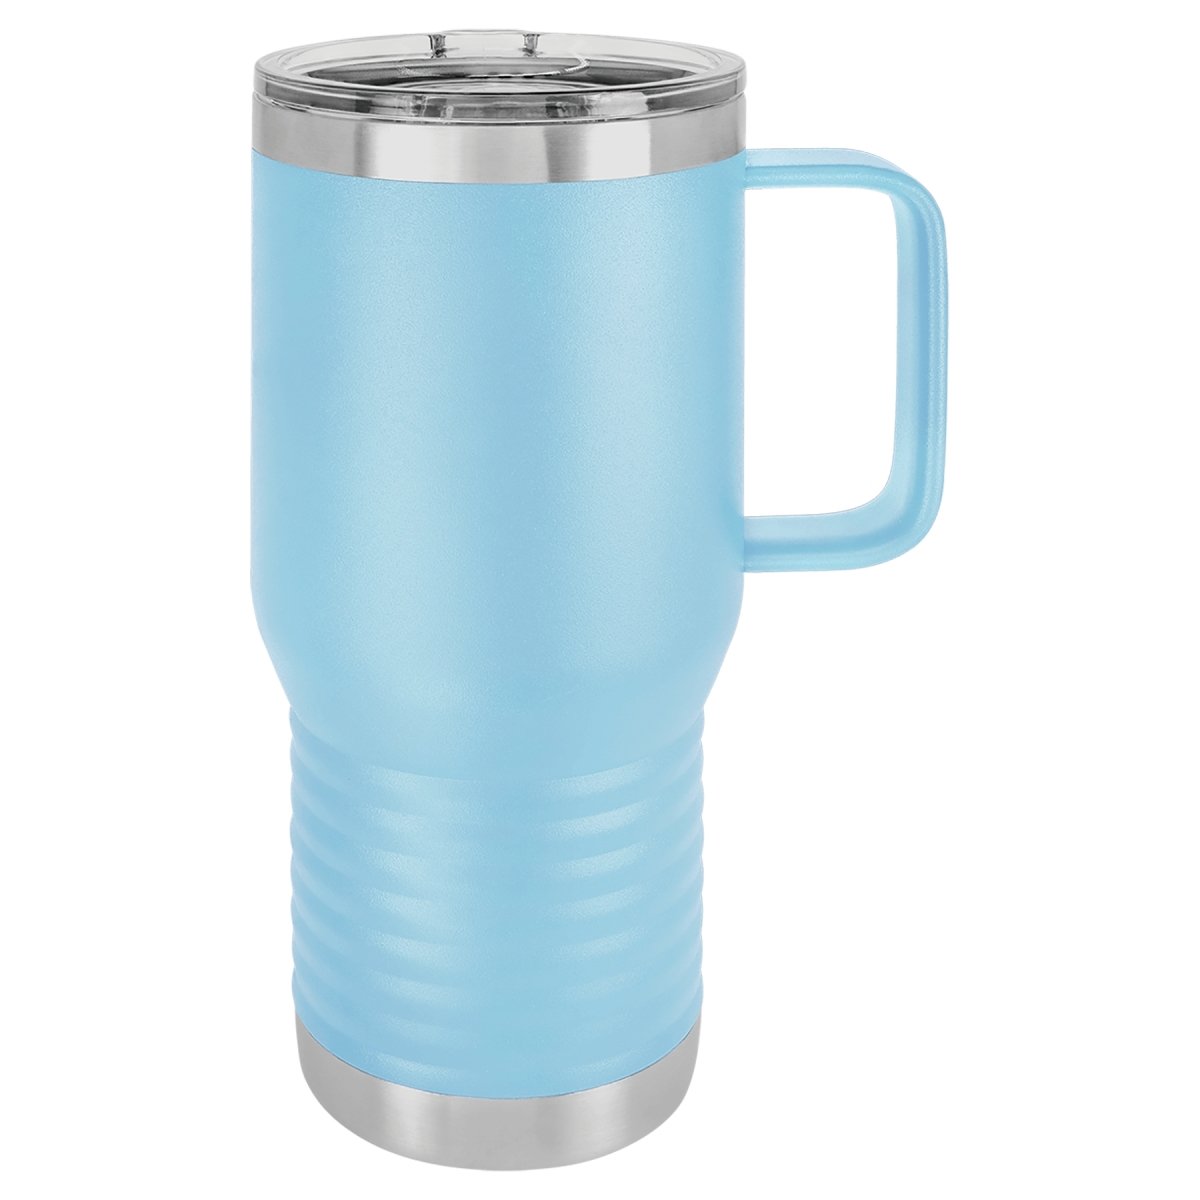 https://theluuacompany.com/cdn/shop/products/20-oz-stainless-steel-powder-coated-travel-mugs-with-lid-321548.jpg?v=1669959893&width=1445